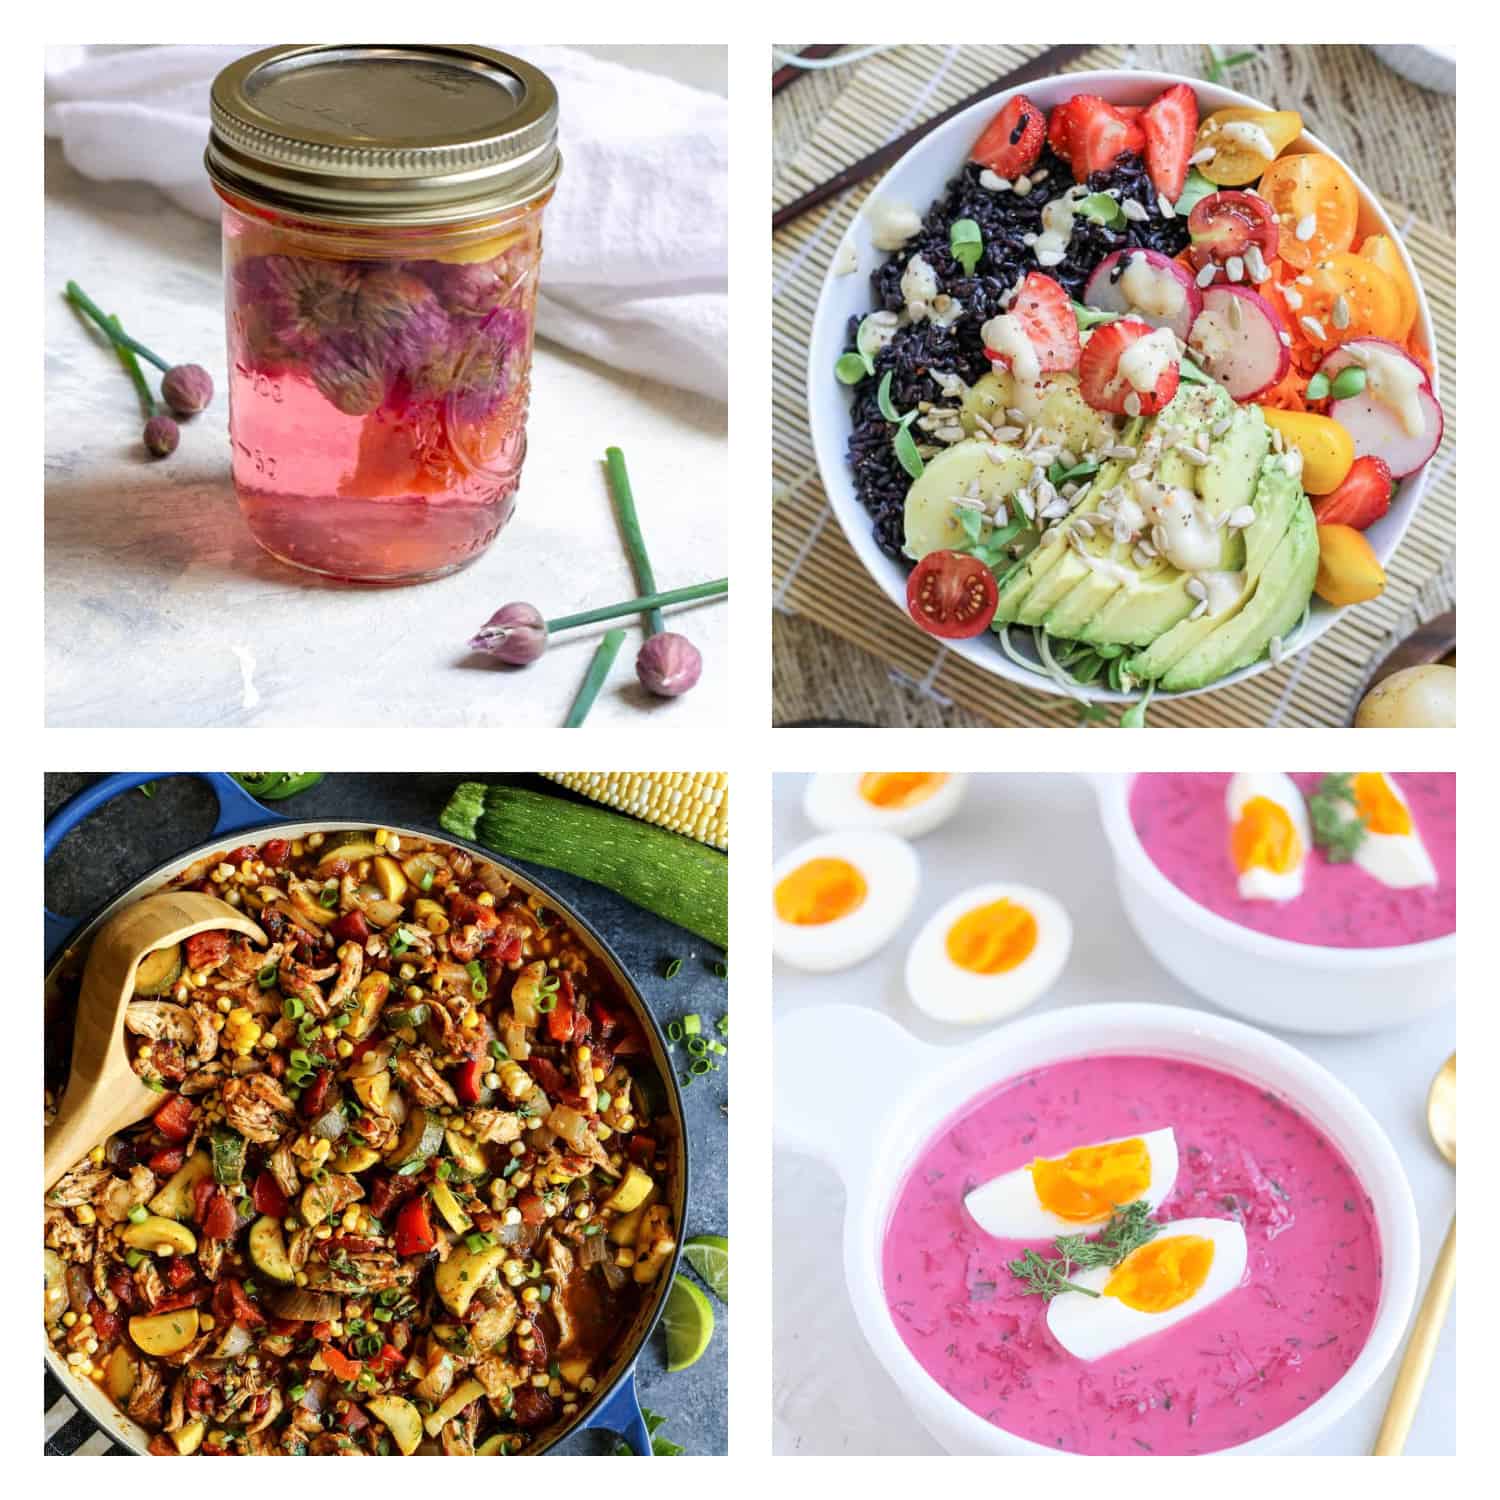 Pin Collage:   A jar of vinegar, a bowl of salad, a bowl of pink soup with eggs, and a bowl of vegetables. 